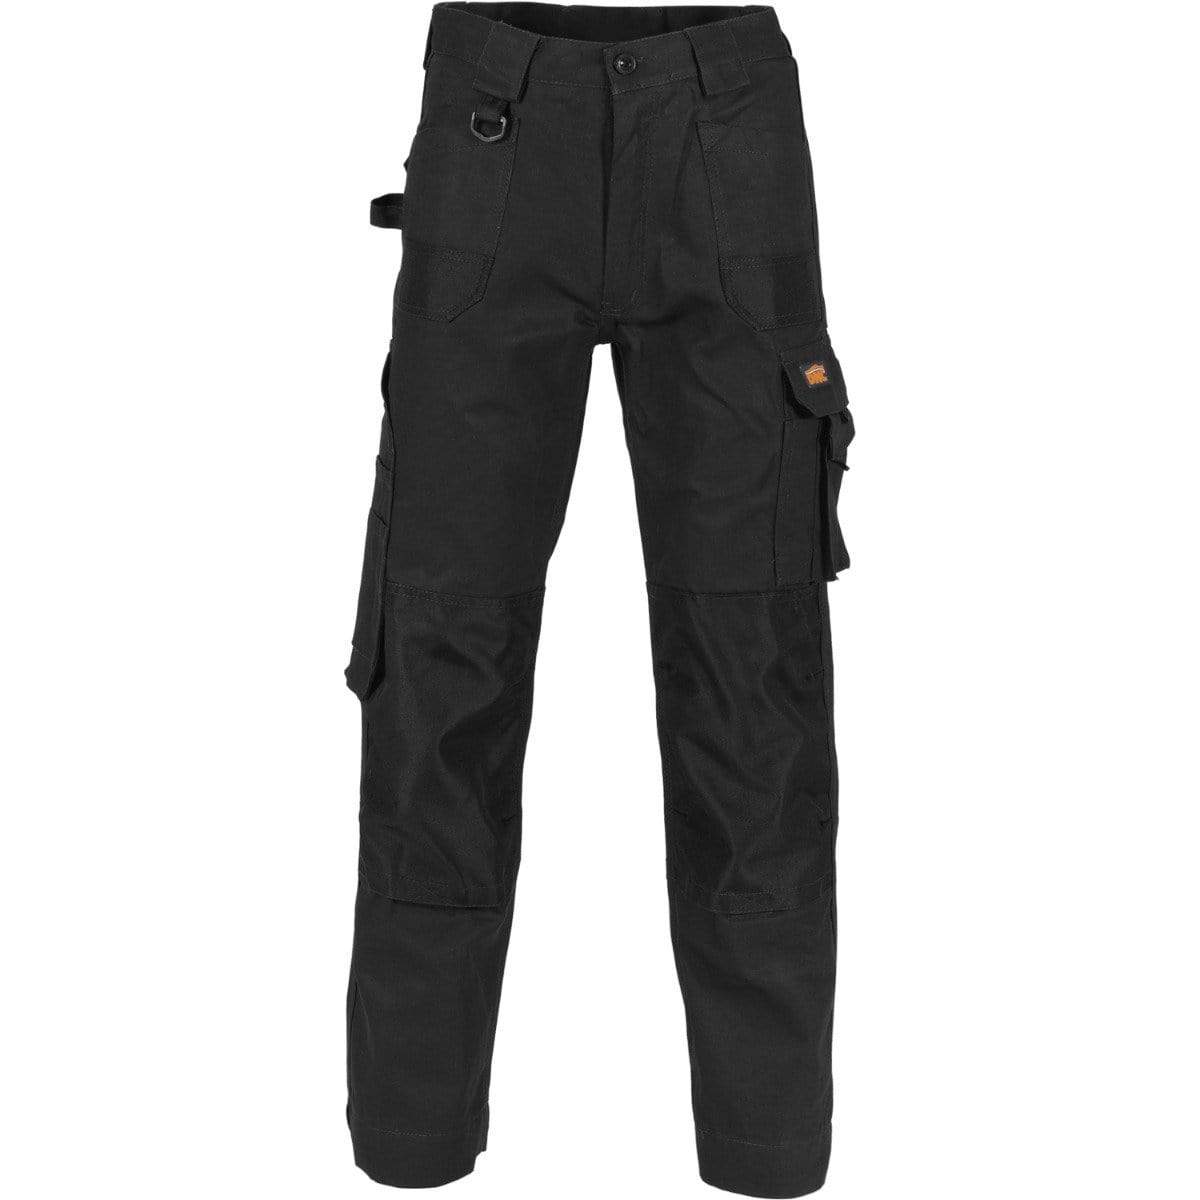 Dnc Workwear Duratex Cotton Duck Weave Cargo Pants - Knee Pads Not Included - 3335 Work Wear DNC Workwear Black 72R 